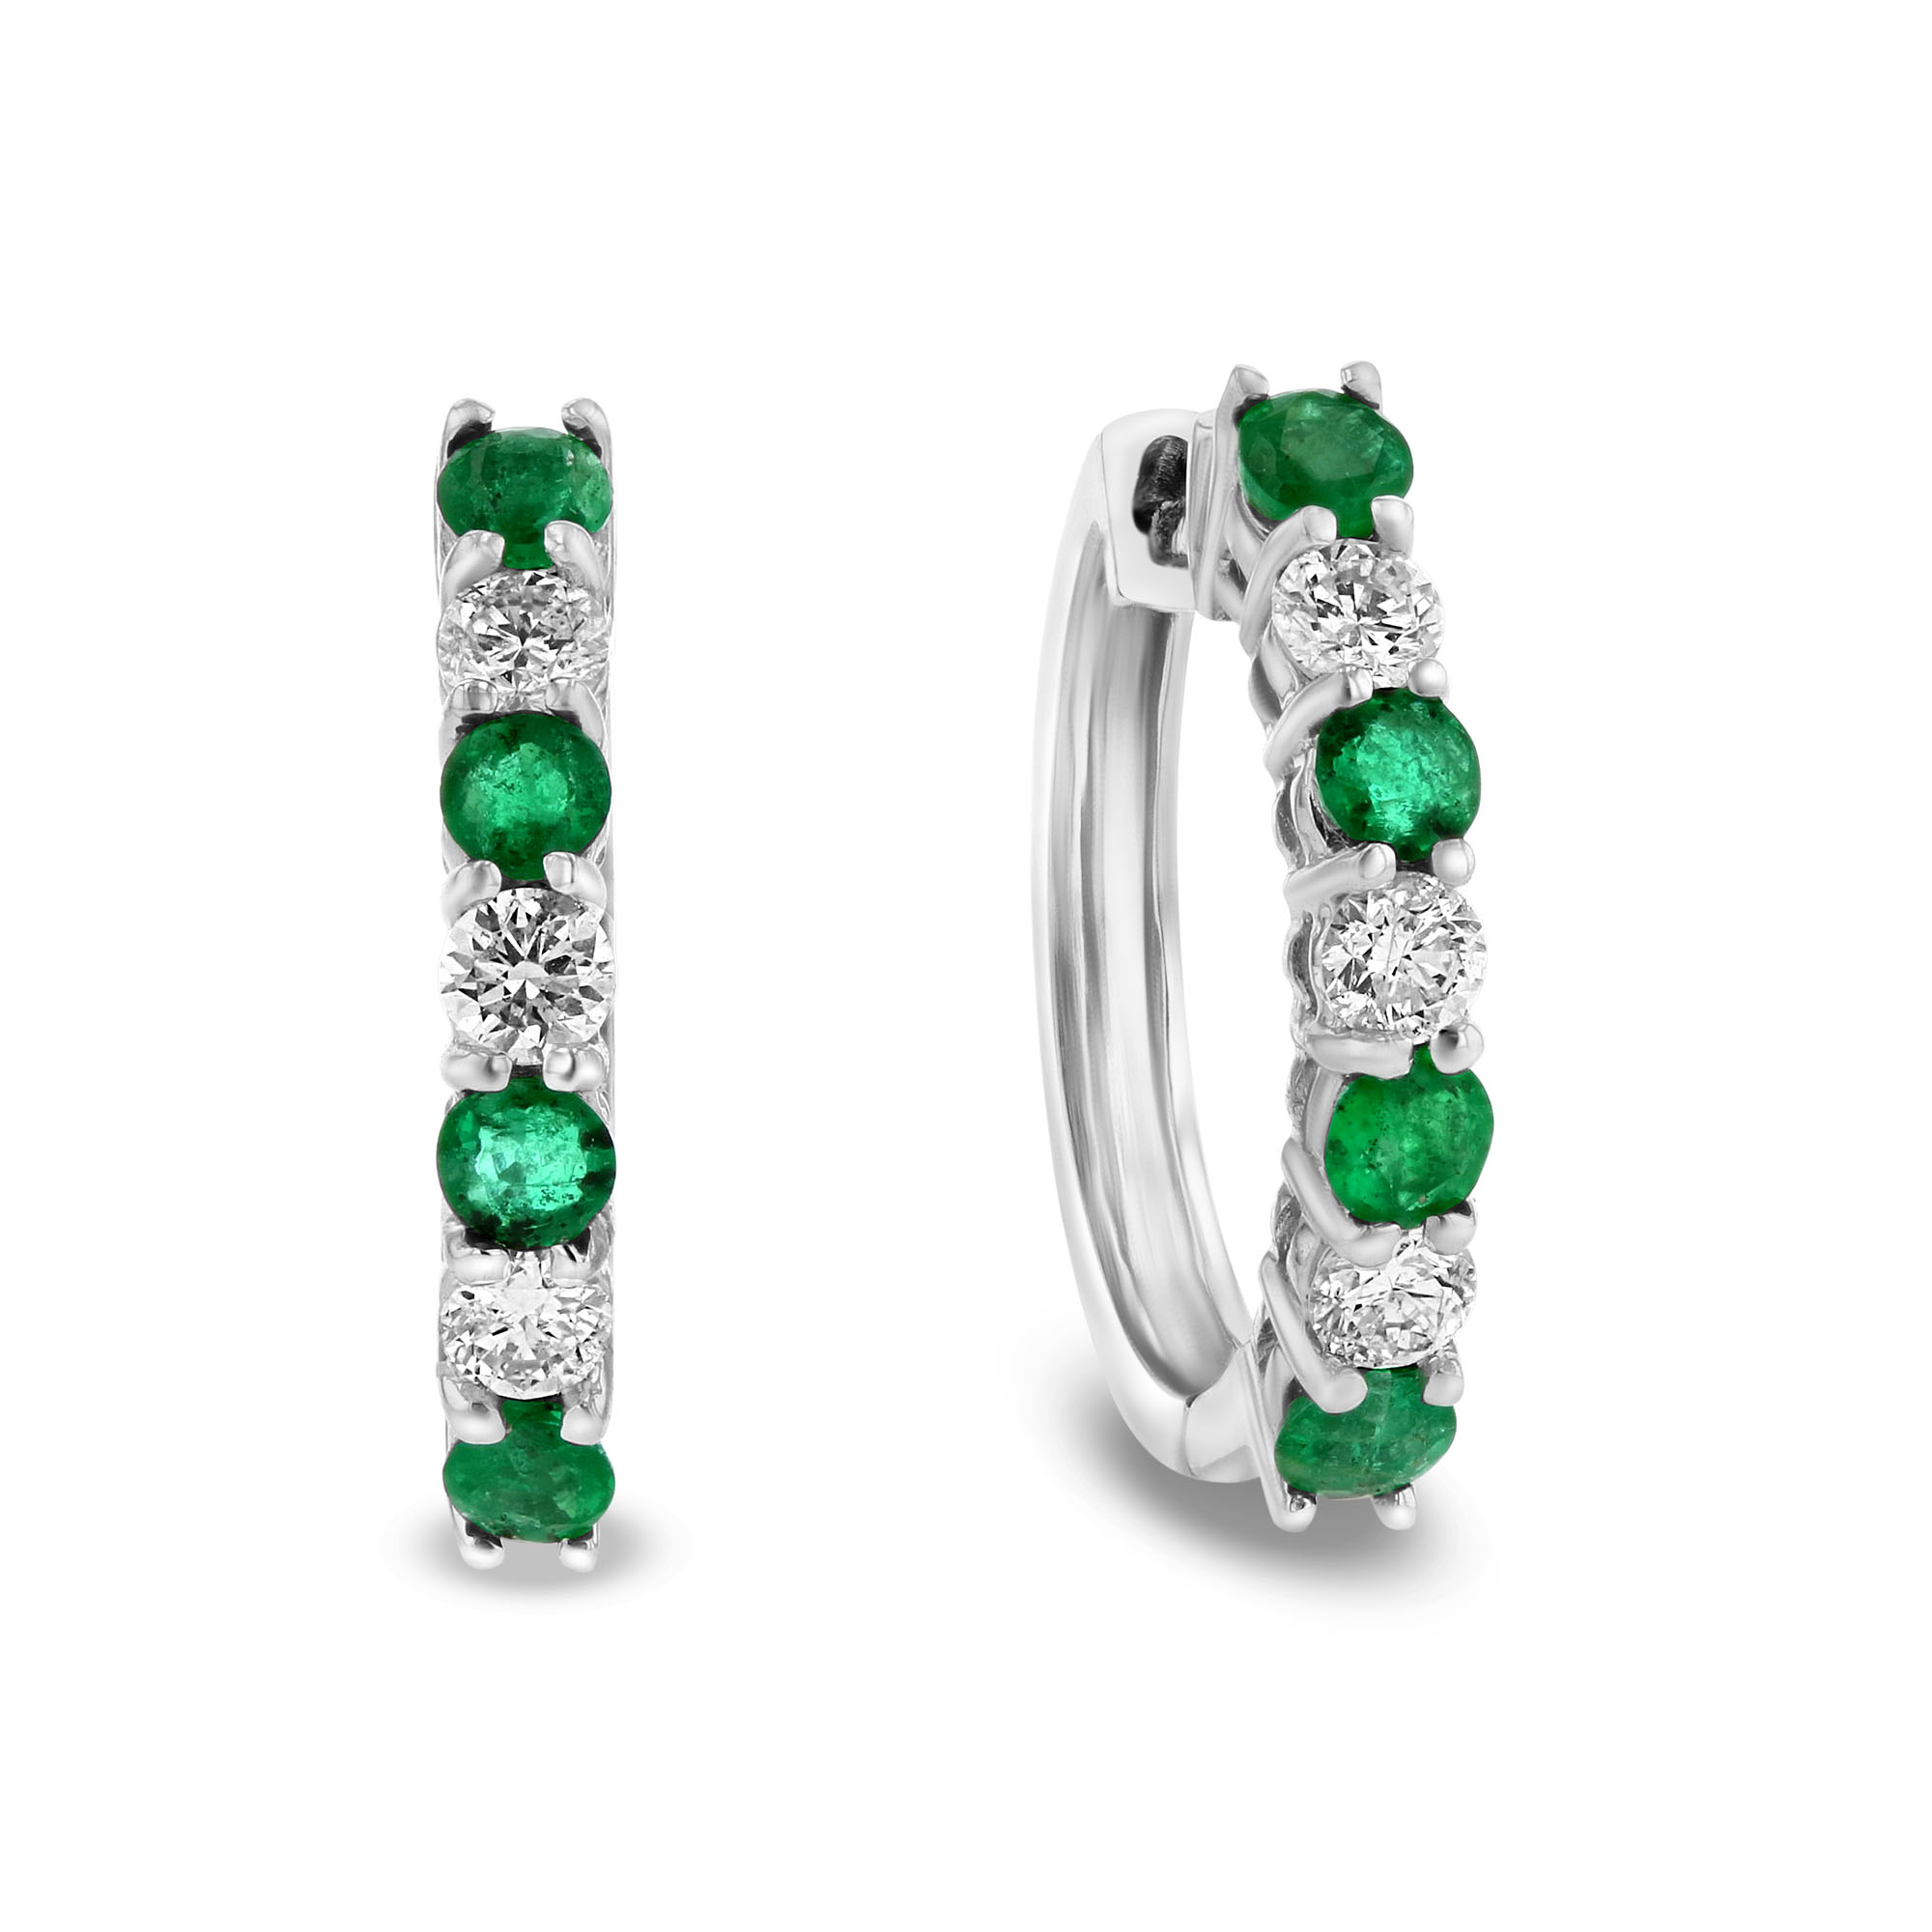 View 1.15ctw Diamond and Emerald Hoop Earrings in 14k White Gold